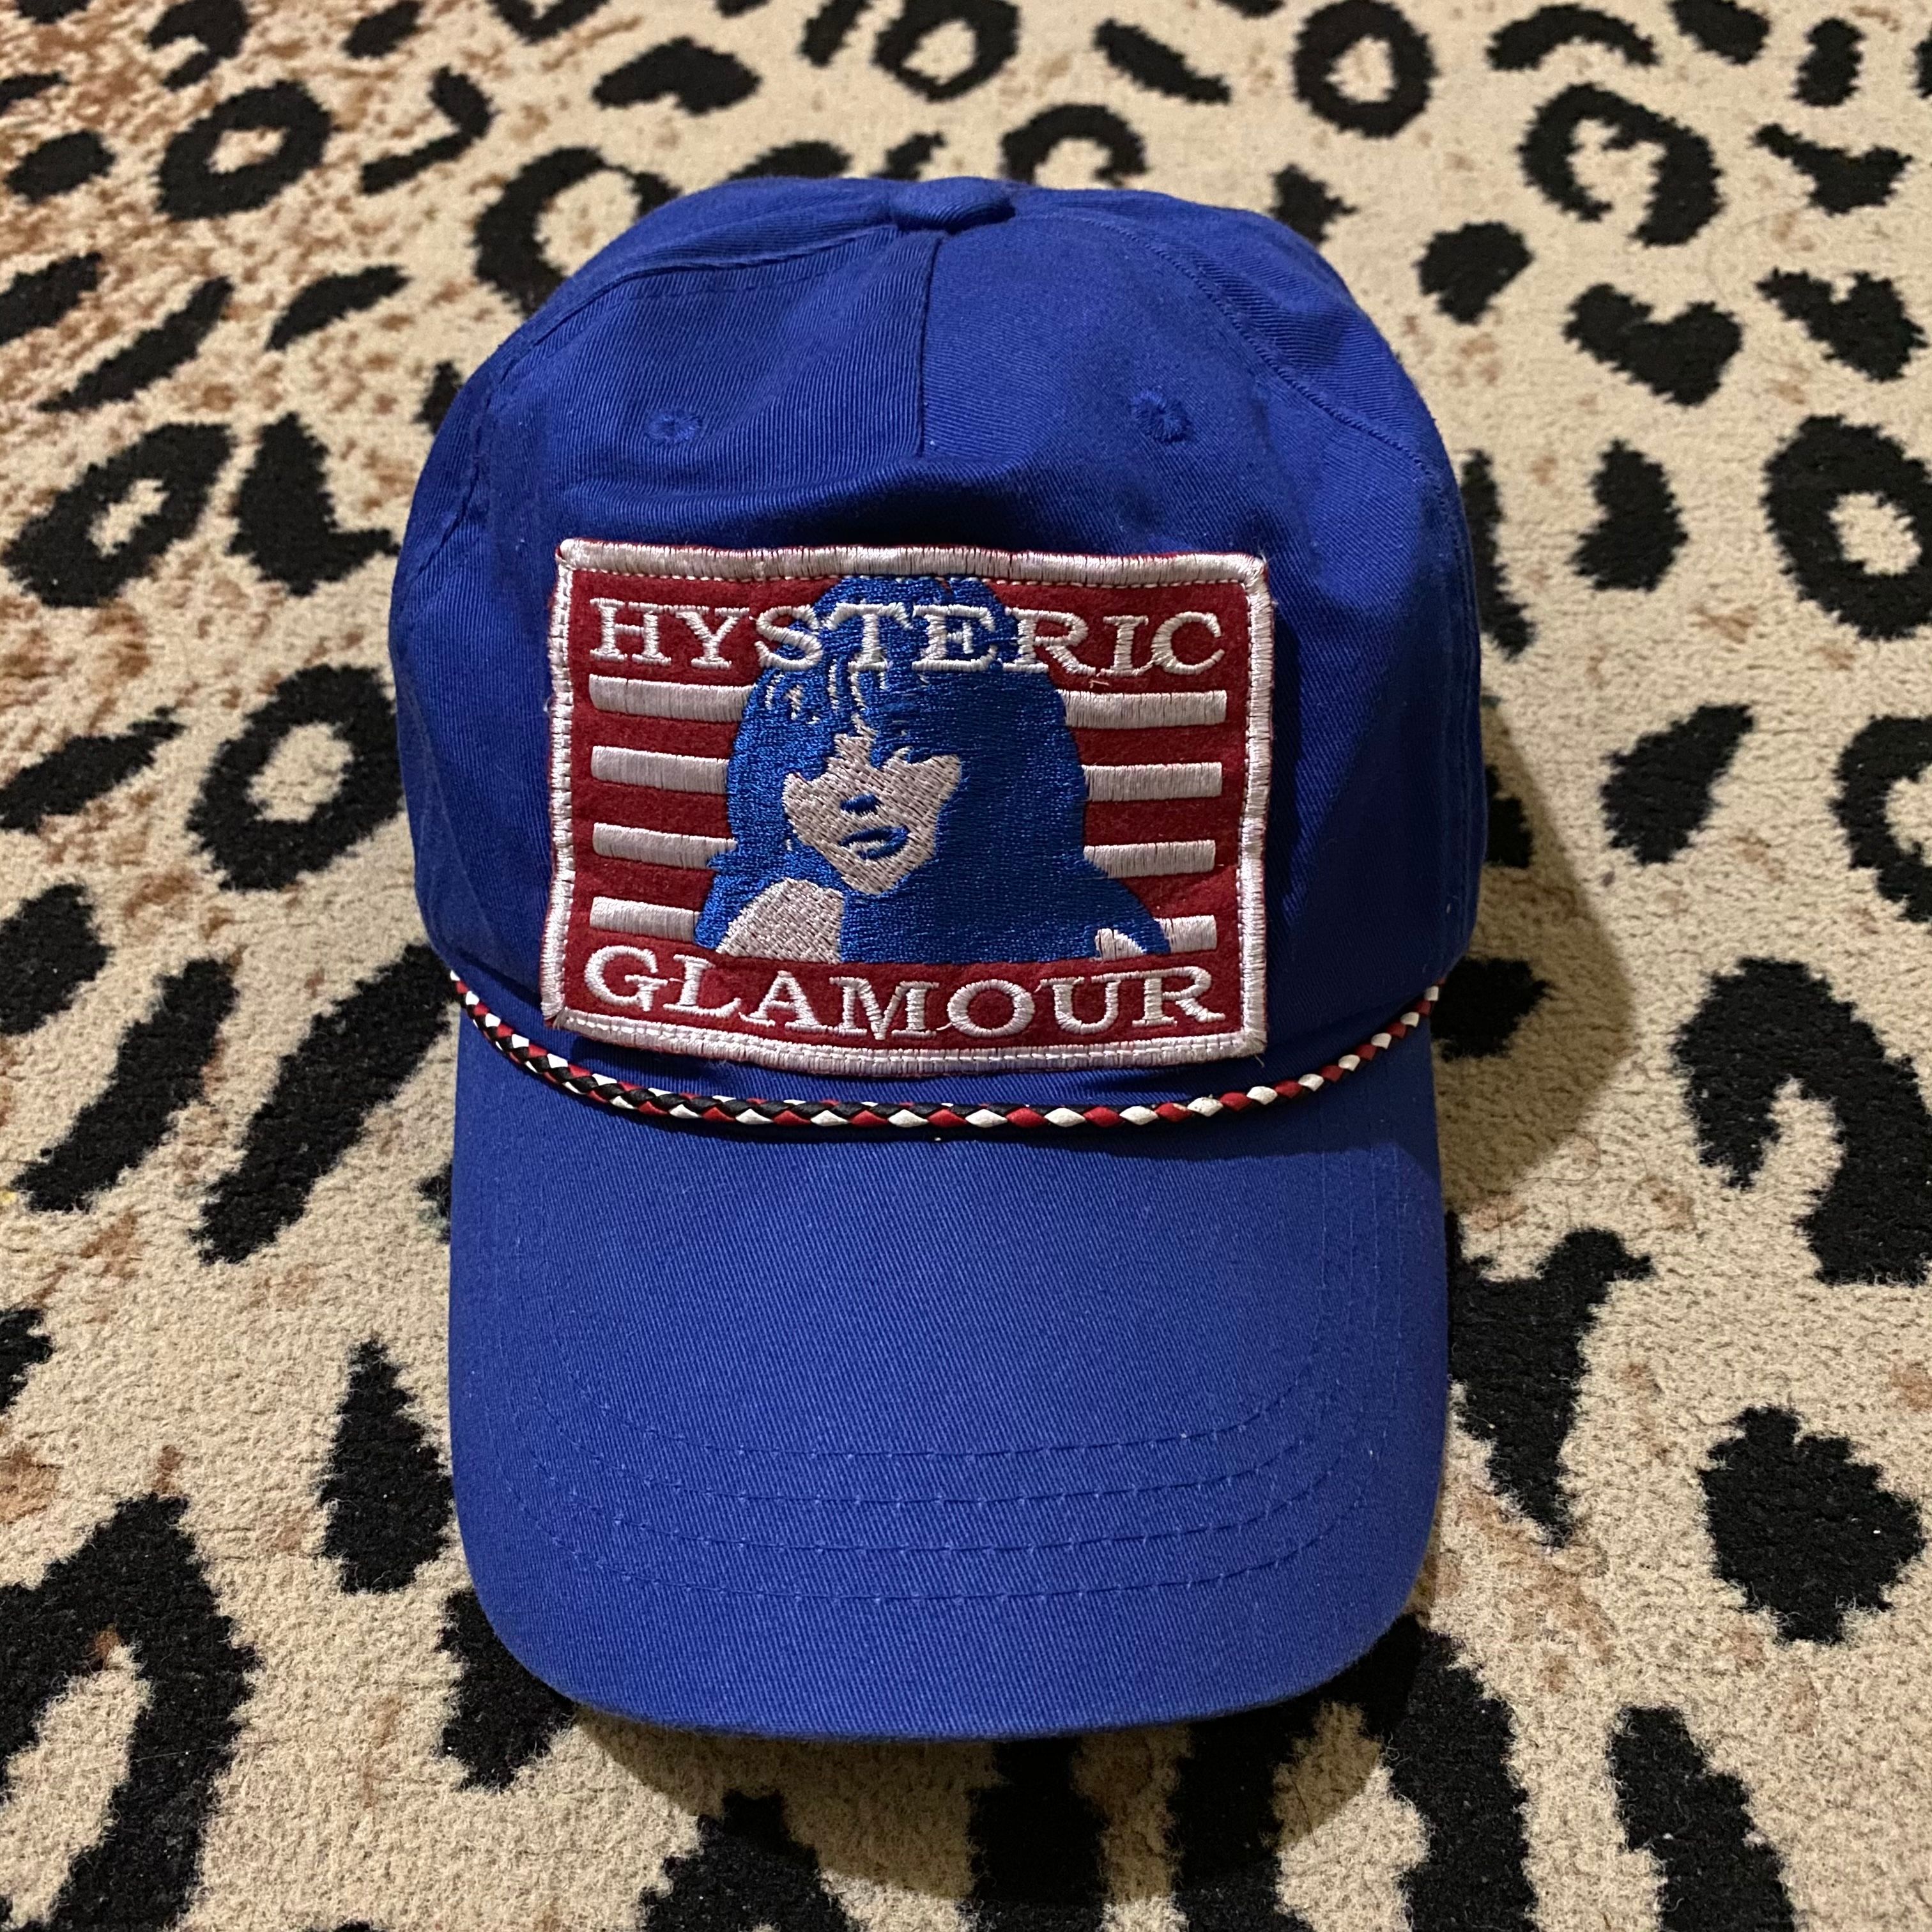 Hysteric Glamour Hysteric Glamour Hat | Grailed